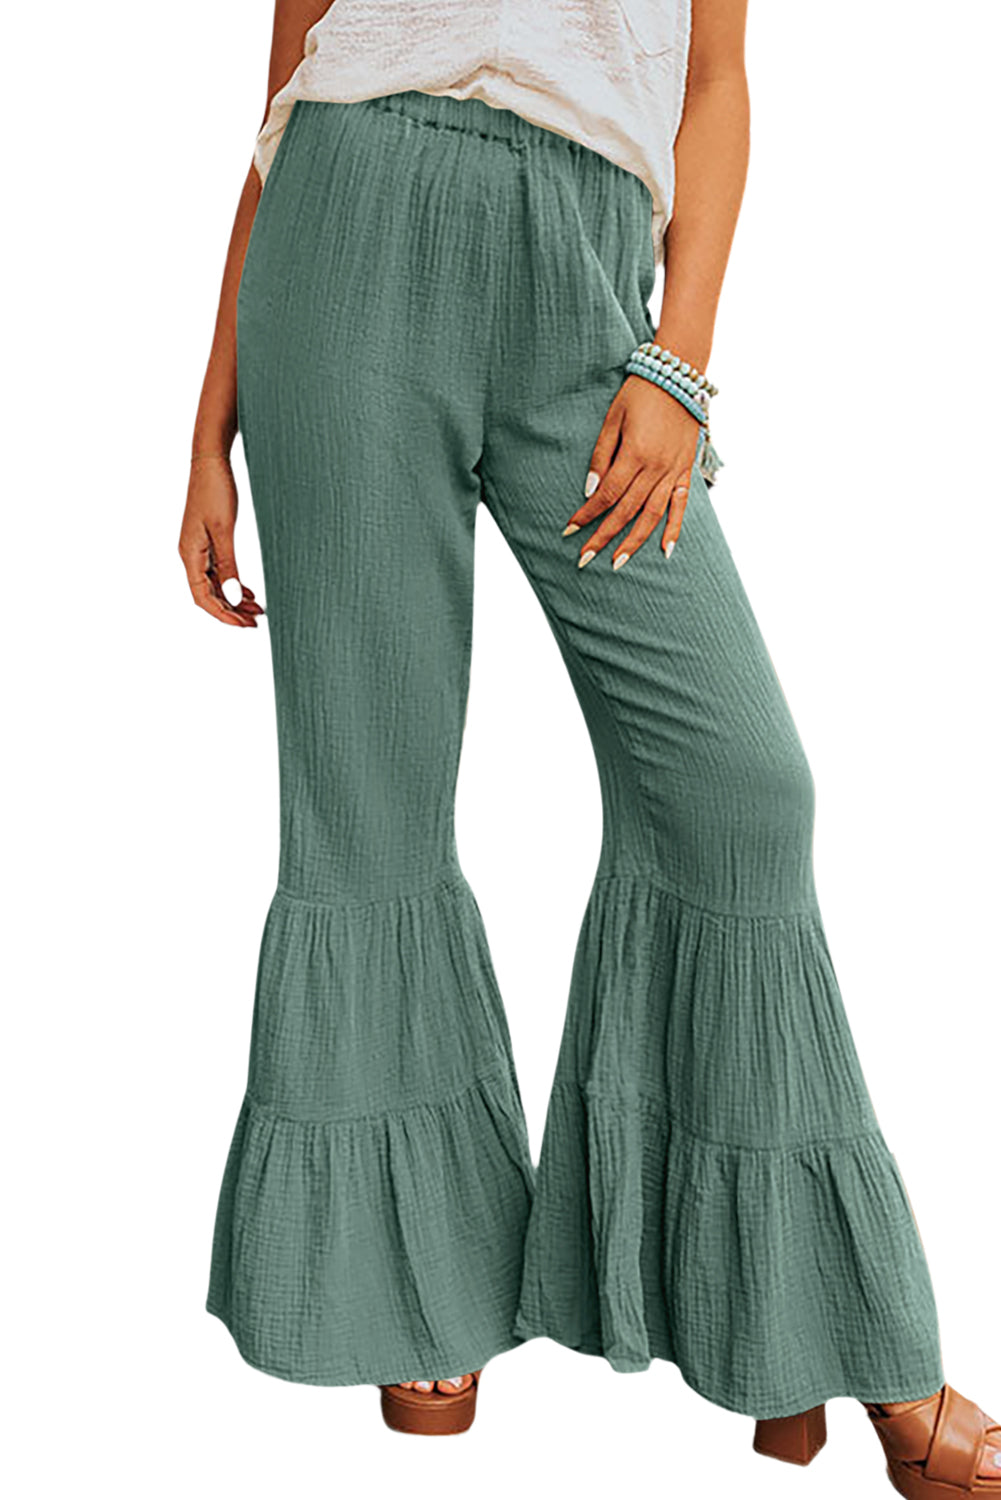 Eco Friendly Linen Cotton Tiered Ruffle Flare High Waisted Pants